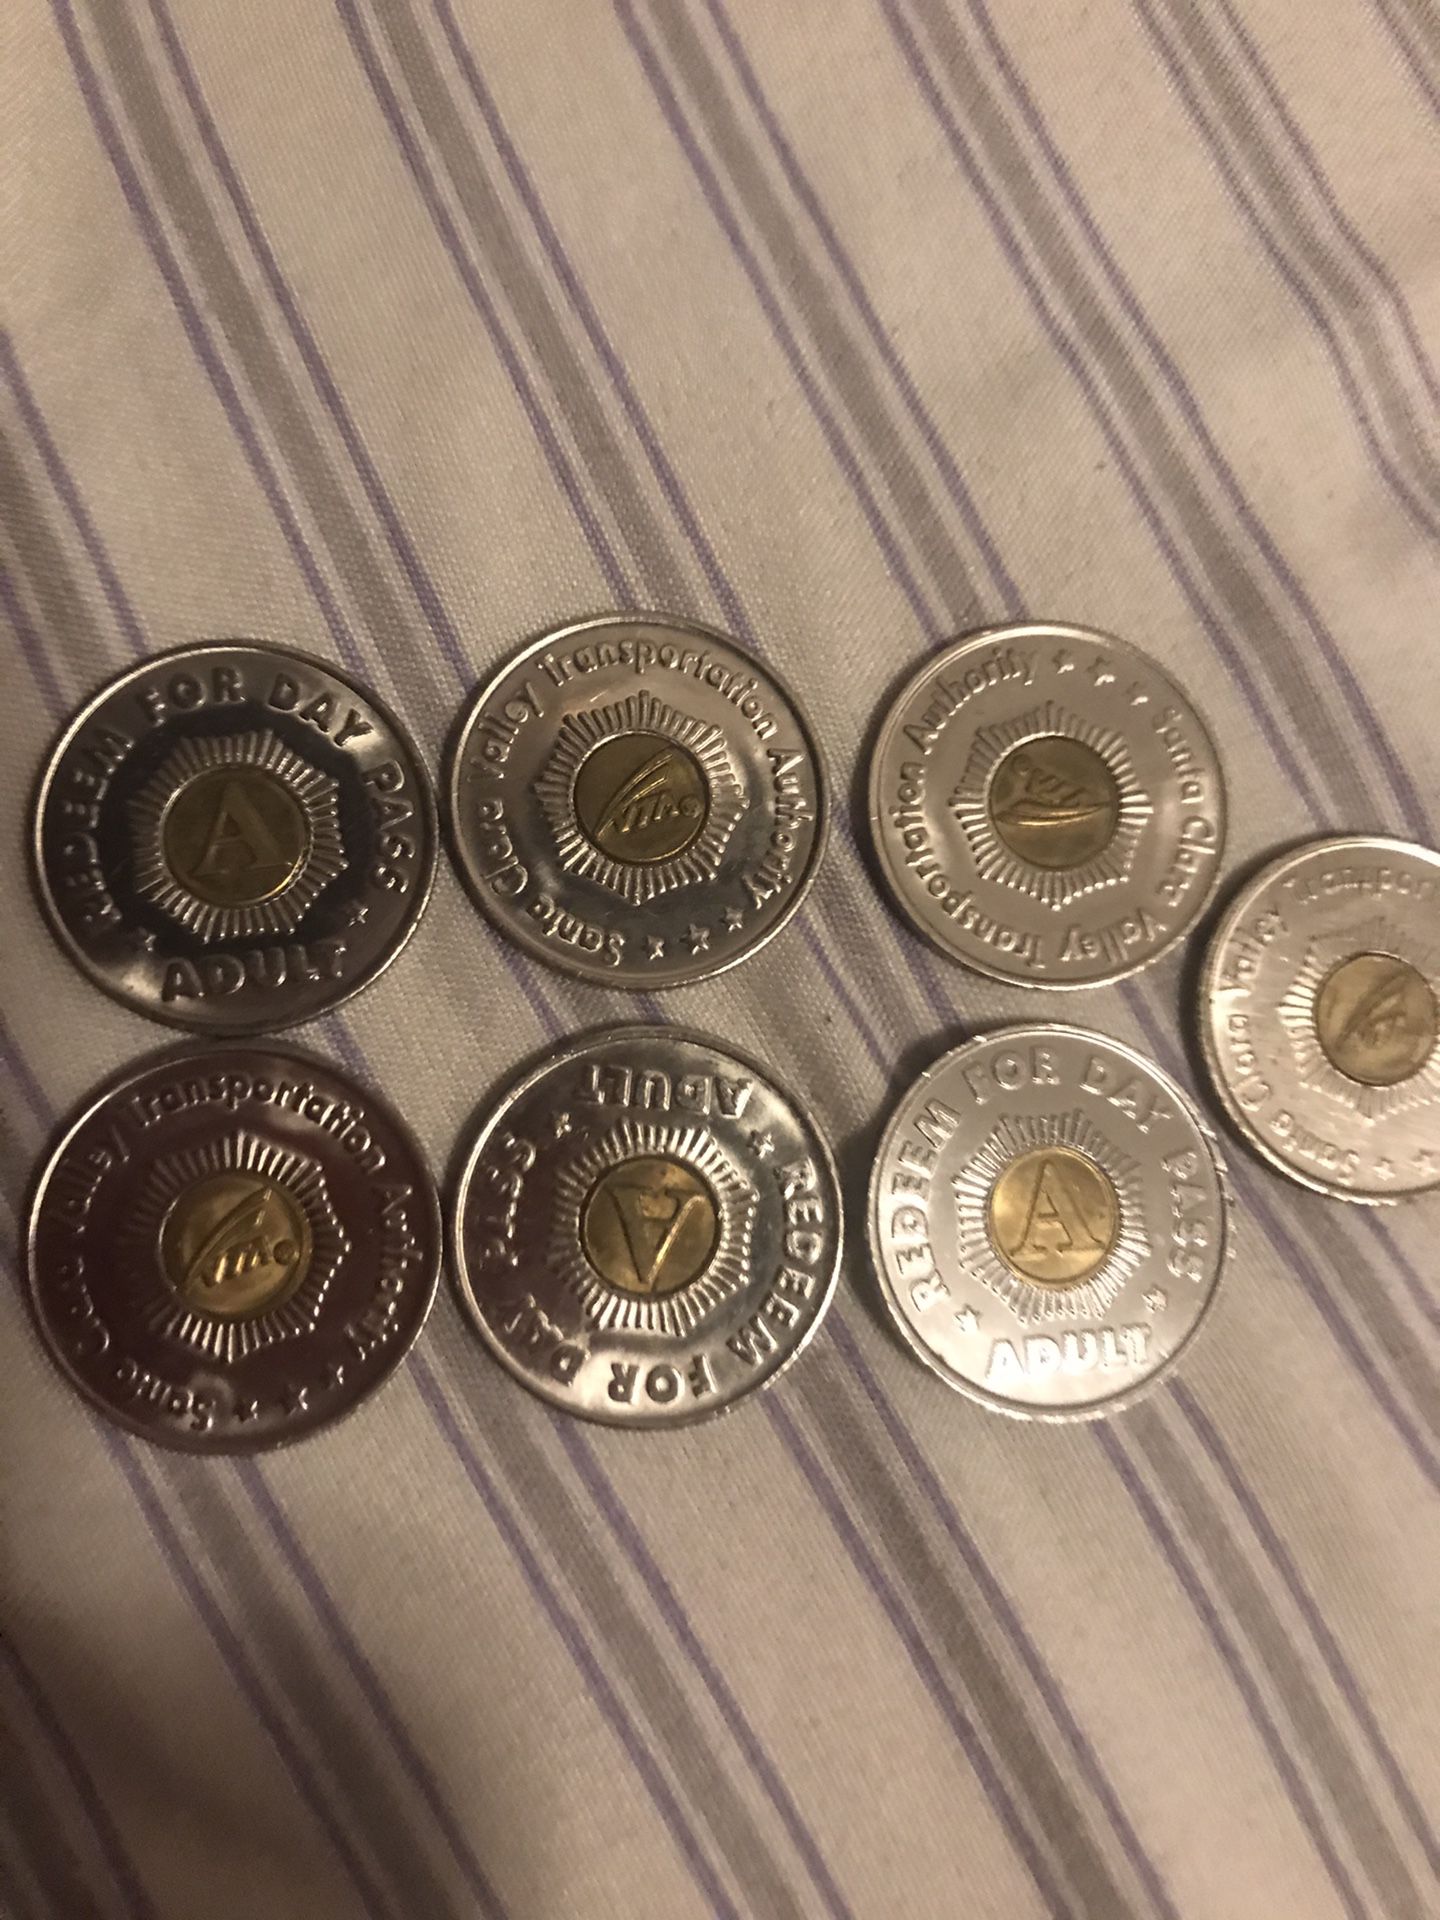 Bus tokens